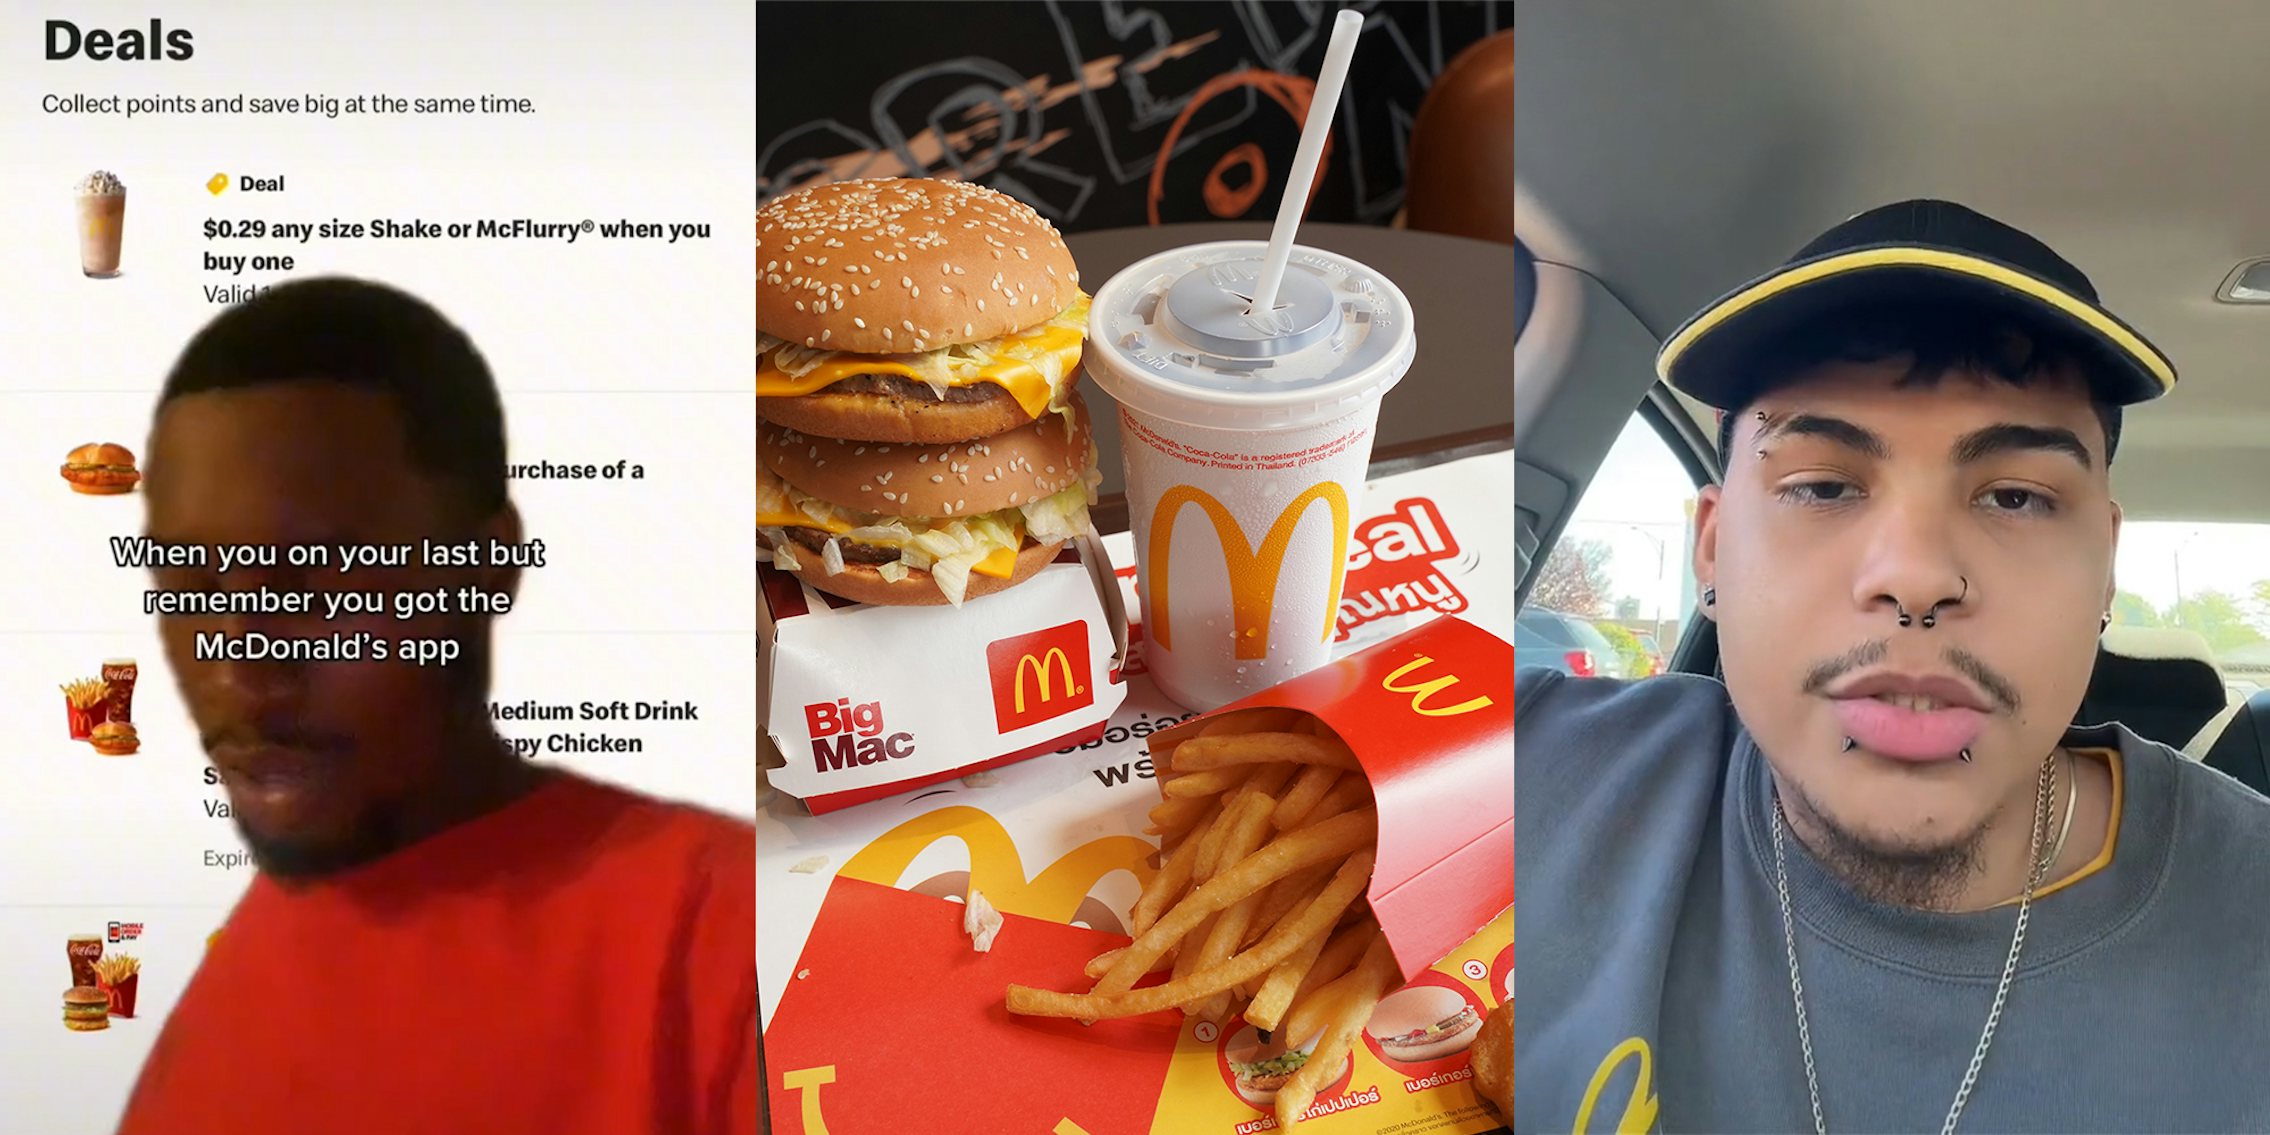 man in front of mcdonald's app with caption 'When you on your last but remember you got the McDonald's app' (l) McDonald's food (c) McDonald's employee in car (r)